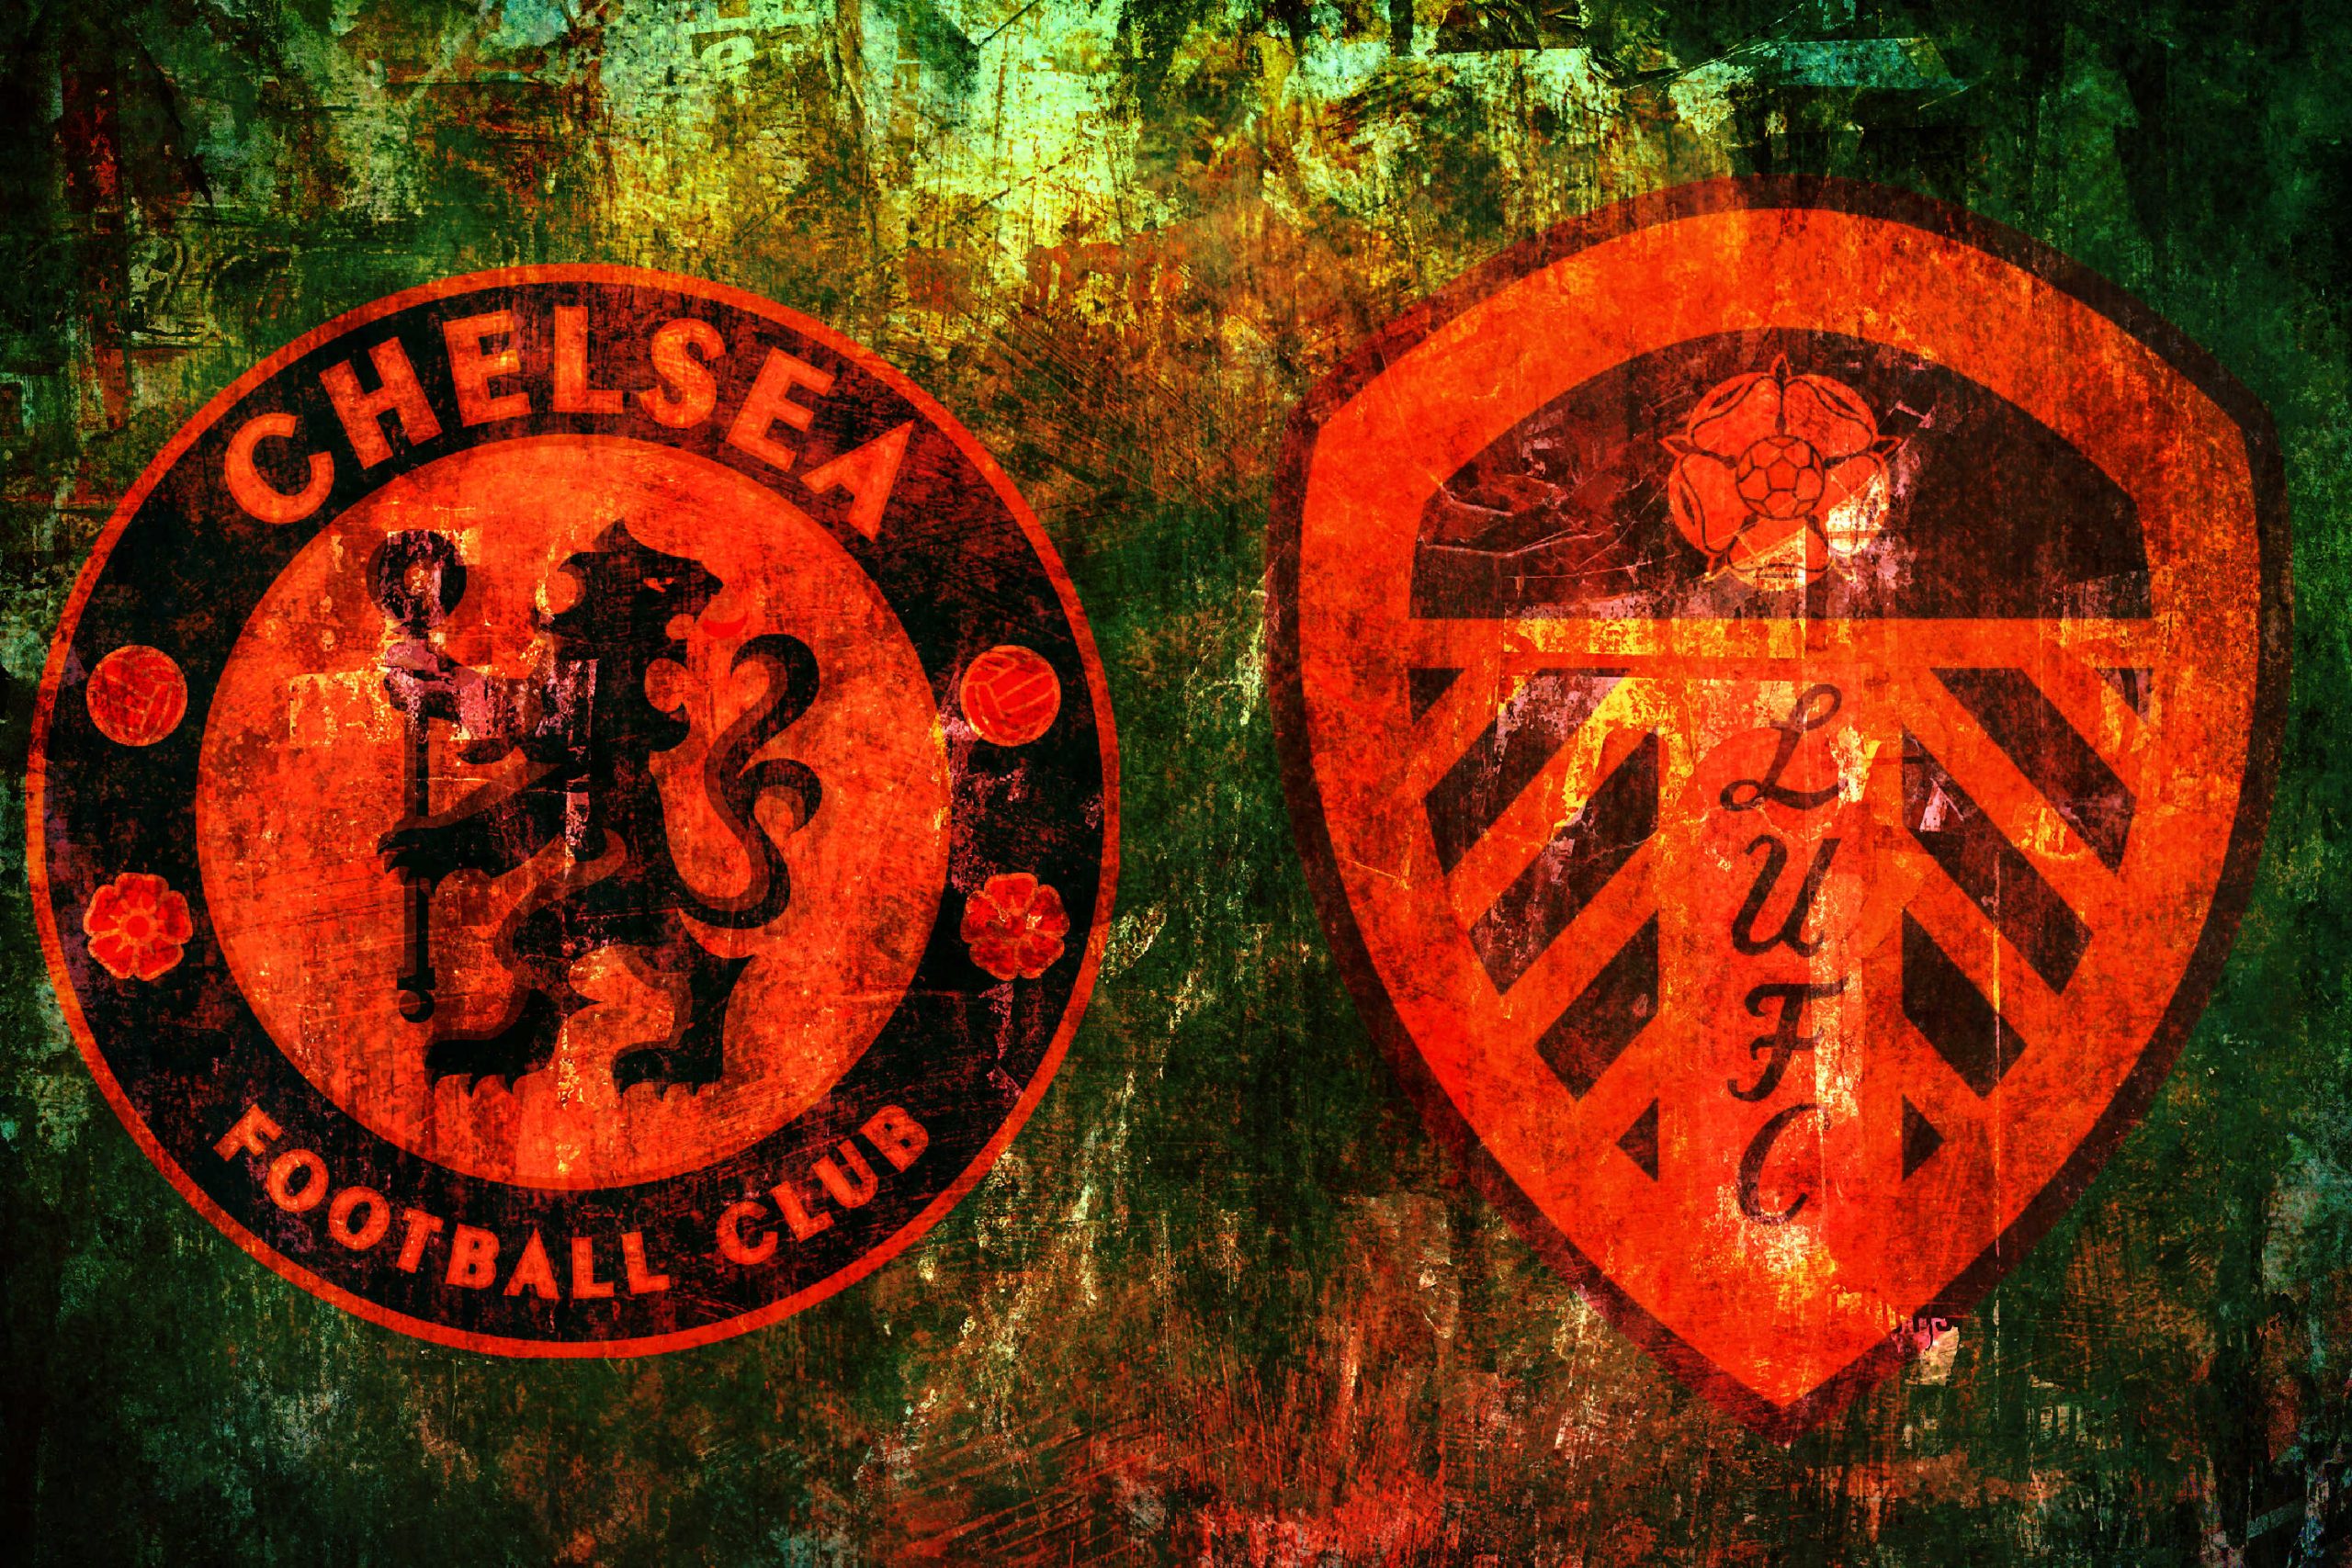 Fascinating trivia about the fierce rivalry between Chelsea and Leeds United